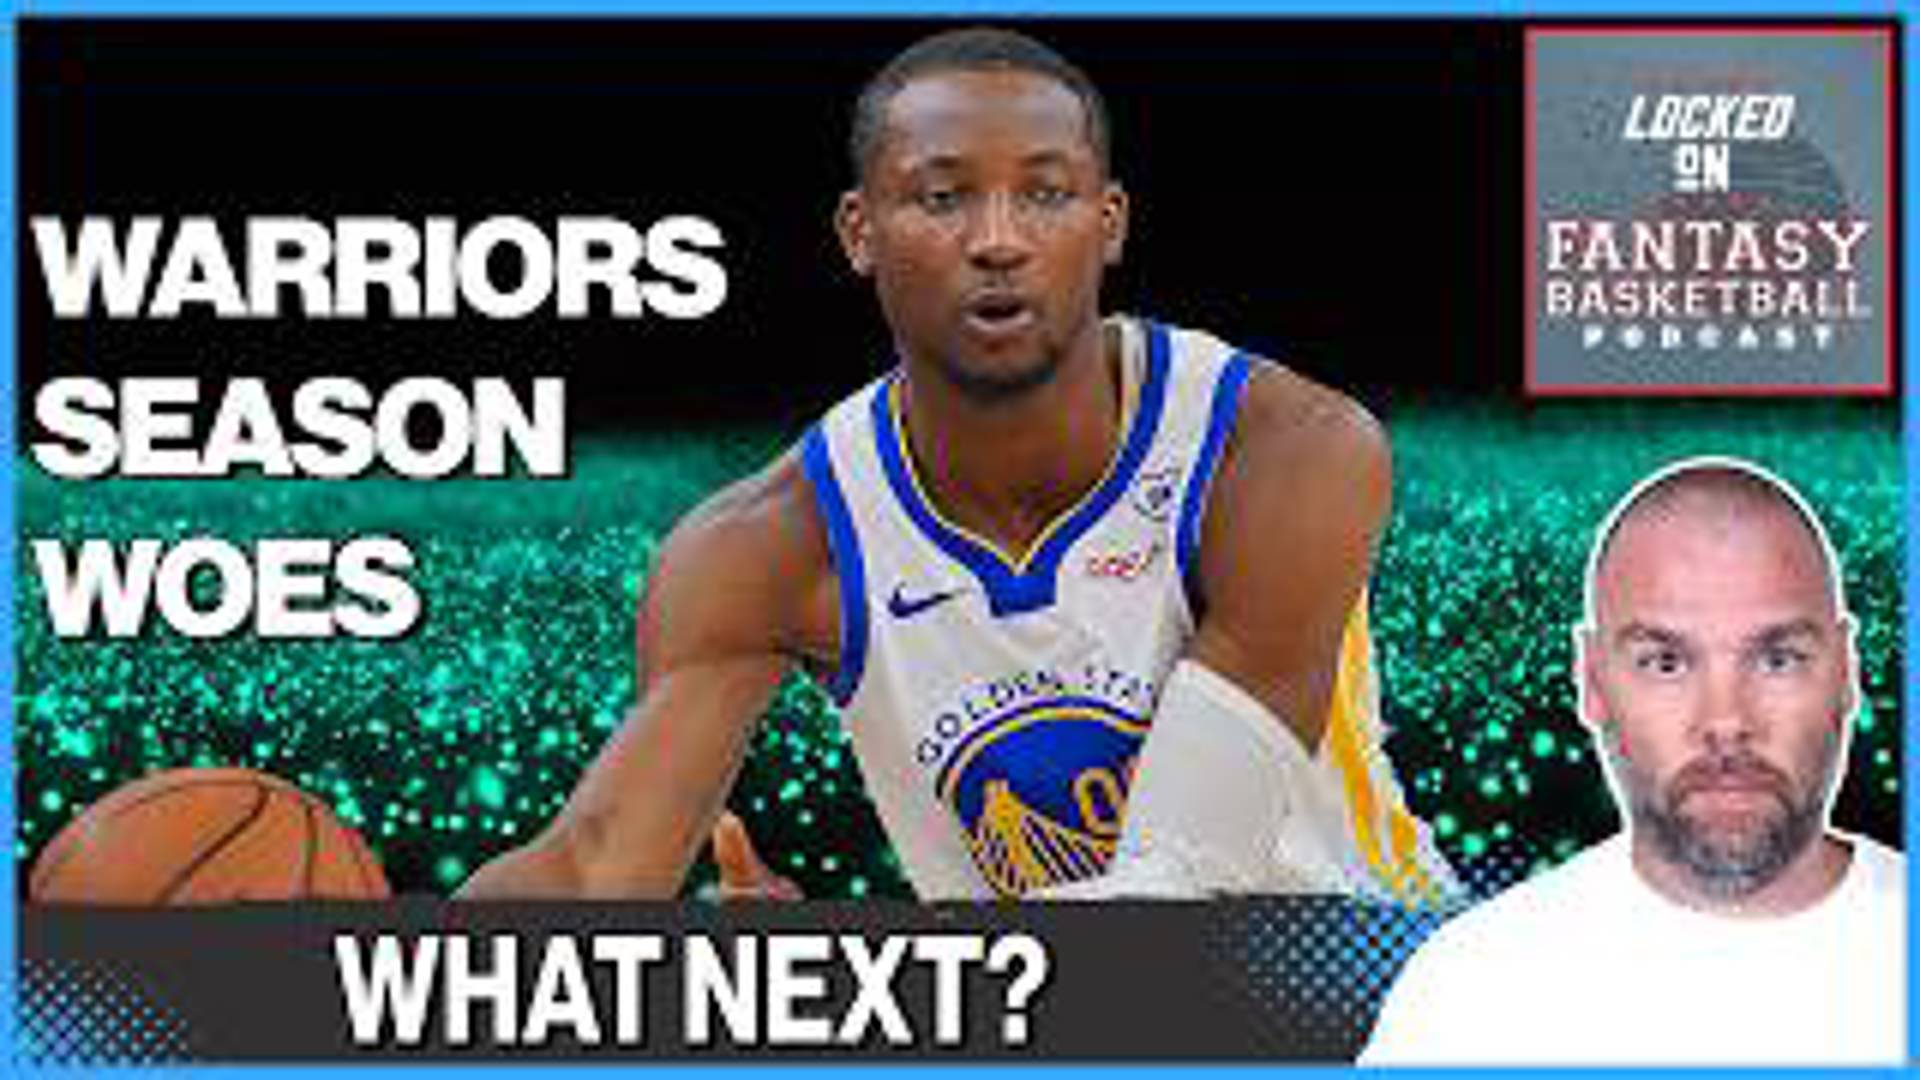 Join Josh Lloyd from Locked On Fantasy Basketball as he breaks down the Golden State Warriors' season and what lies ahead.